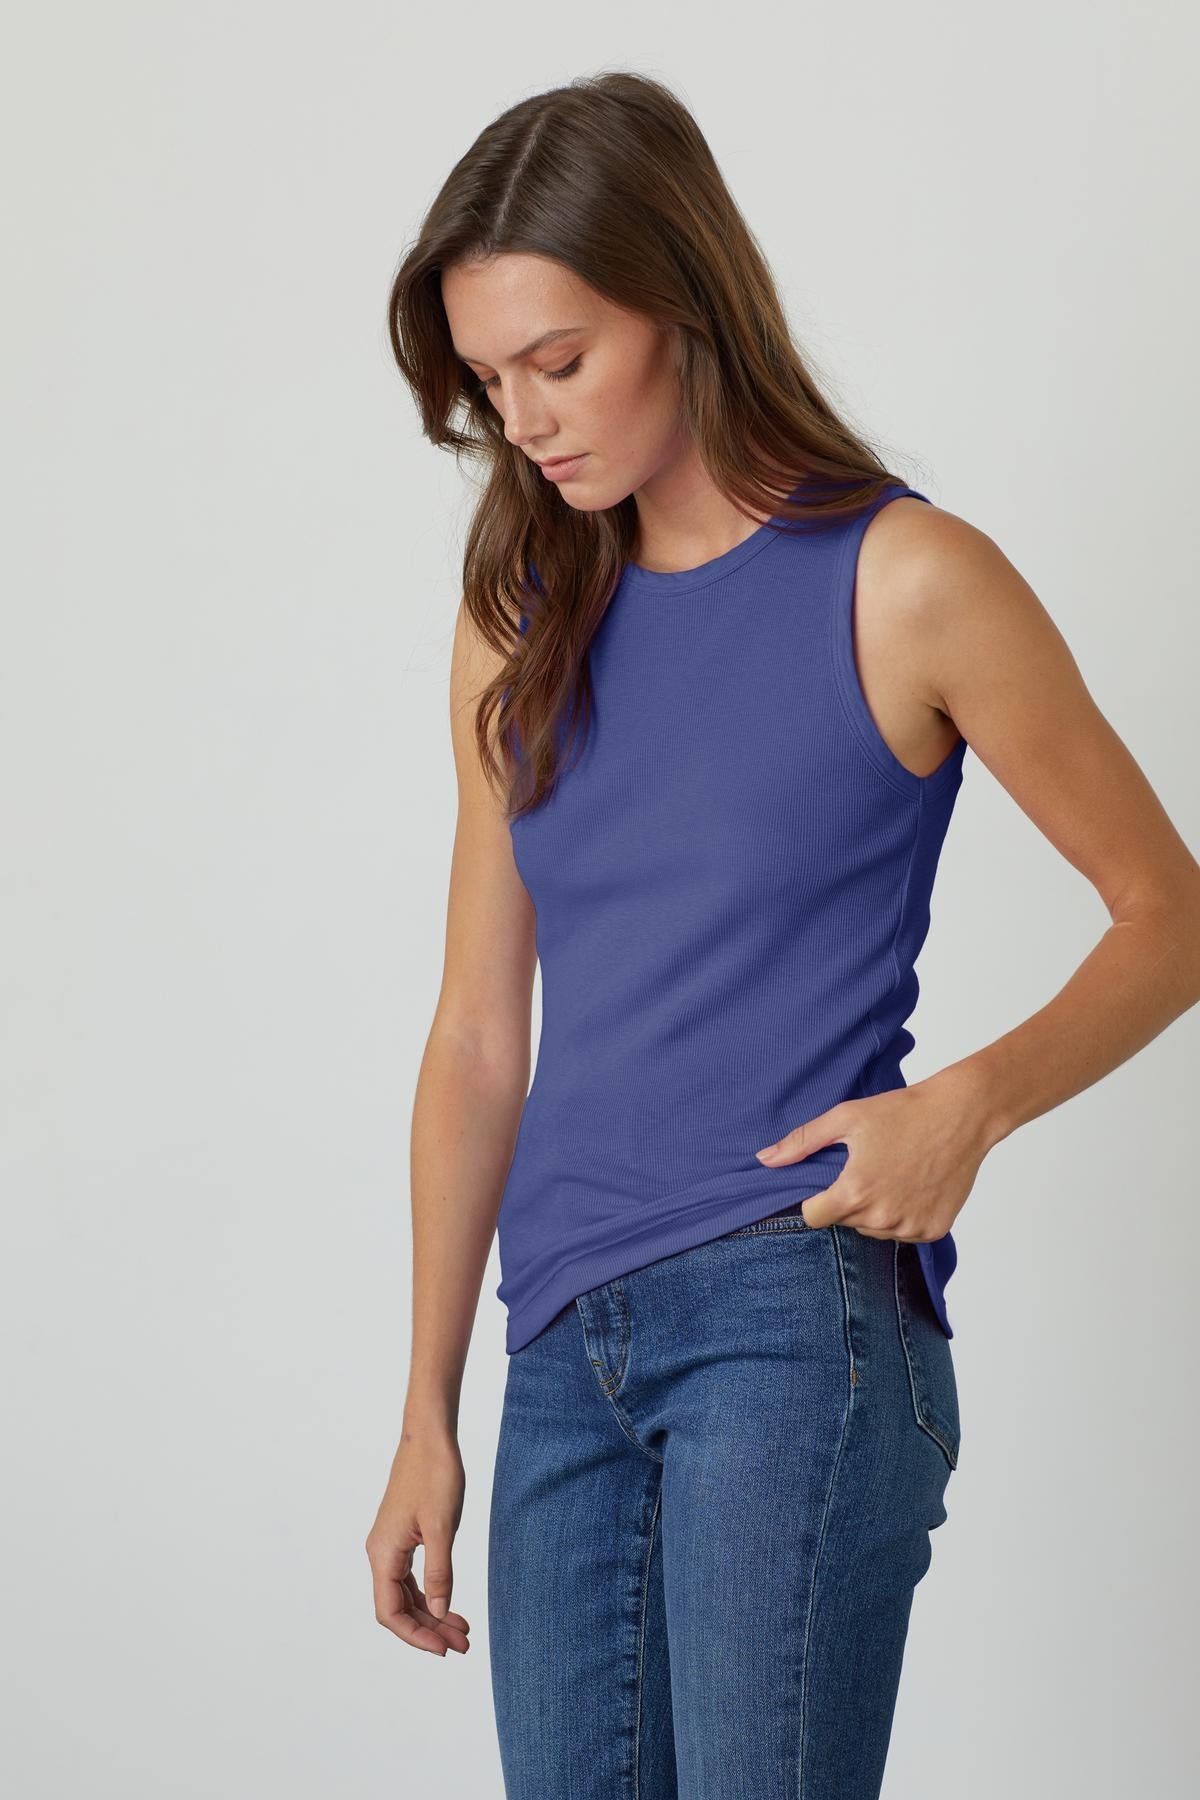   a woman wearing a cavern blue MAXIE RIBBED TANK TOP by Velvet by Graham & Spencer and jeans. 